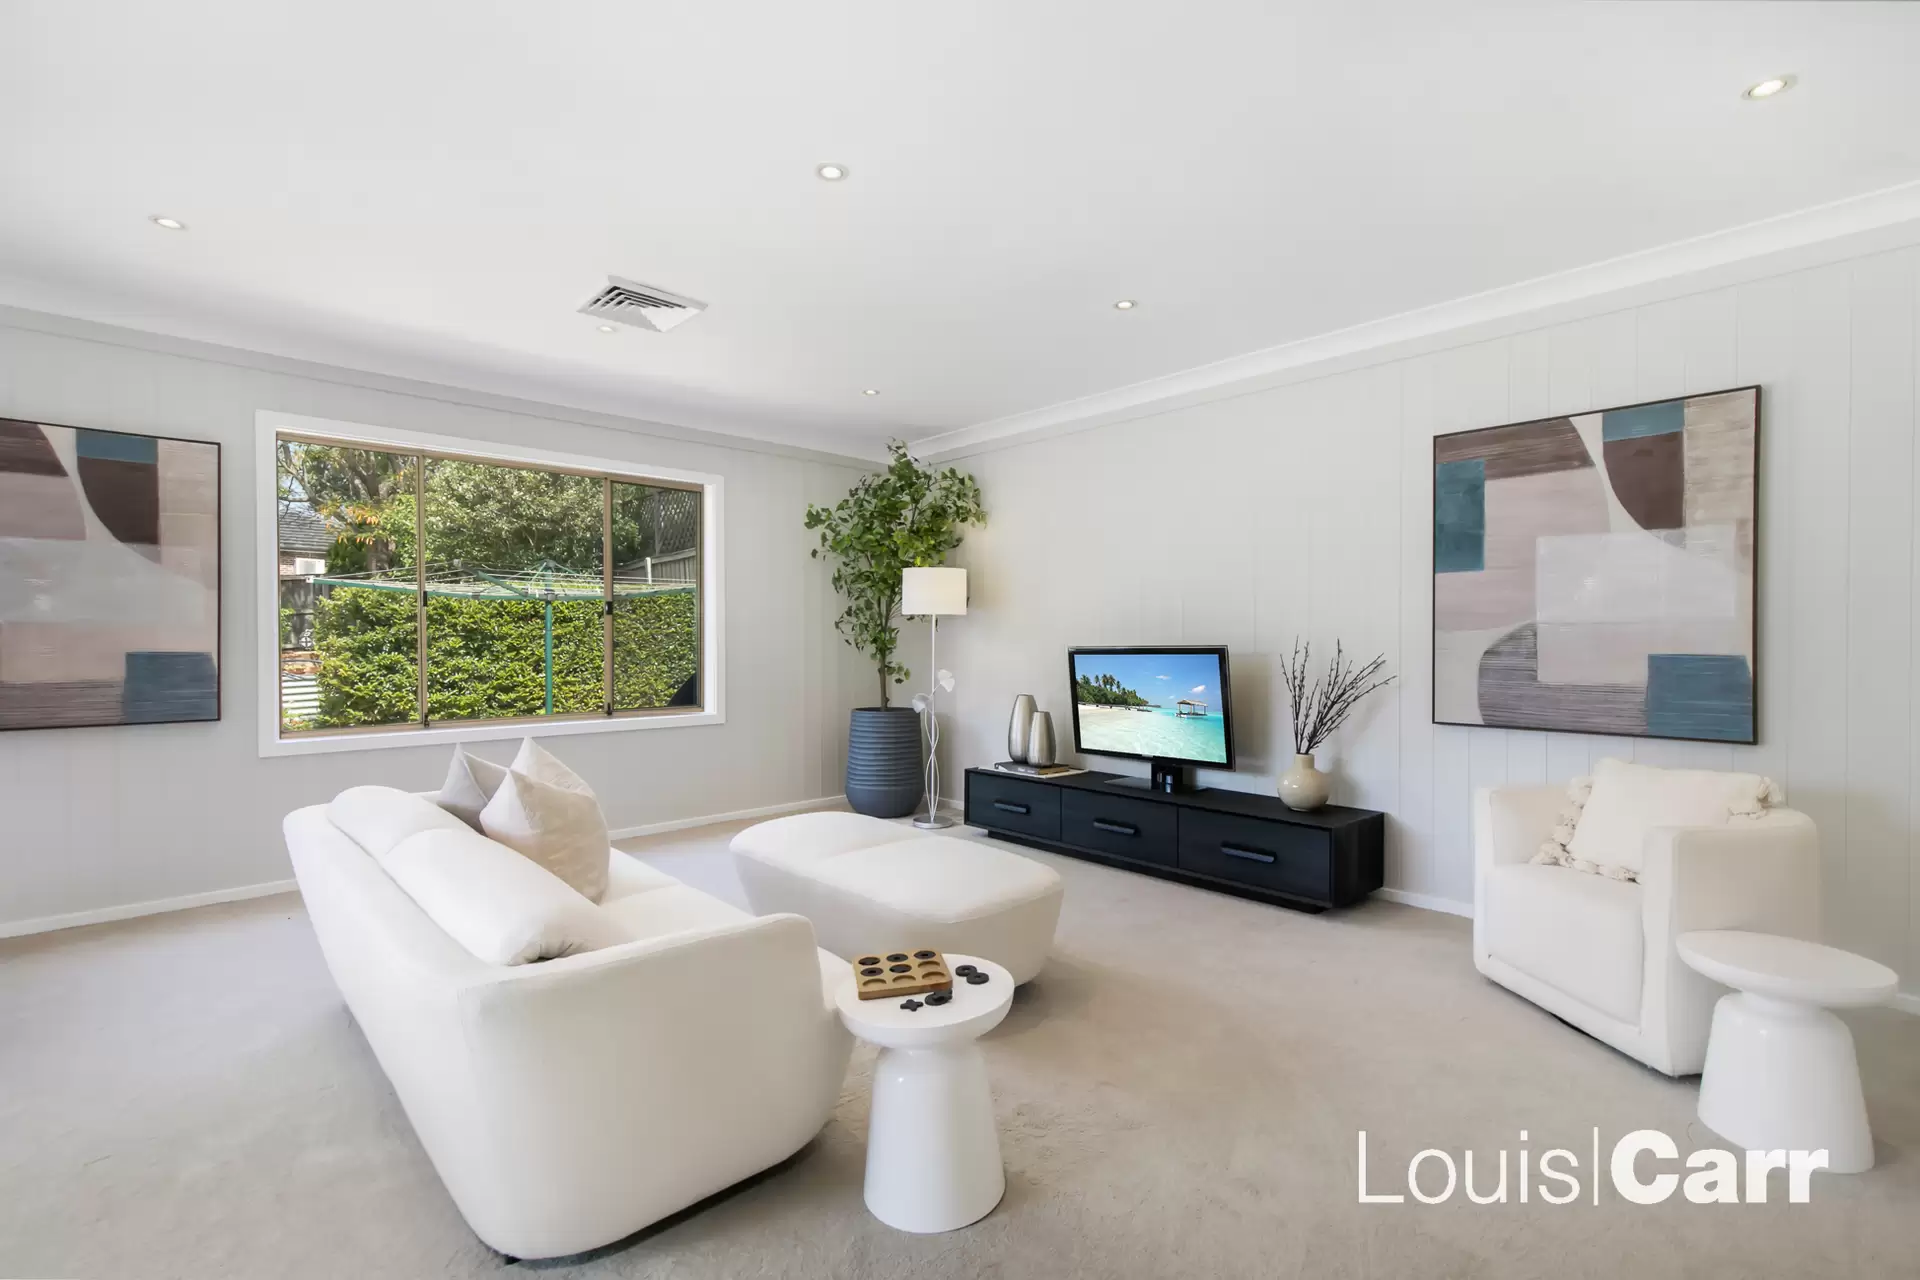 Photo #4: 16 Ellerslie Drive, West Pennant Hills - Sold by Louis Carr Real Estate